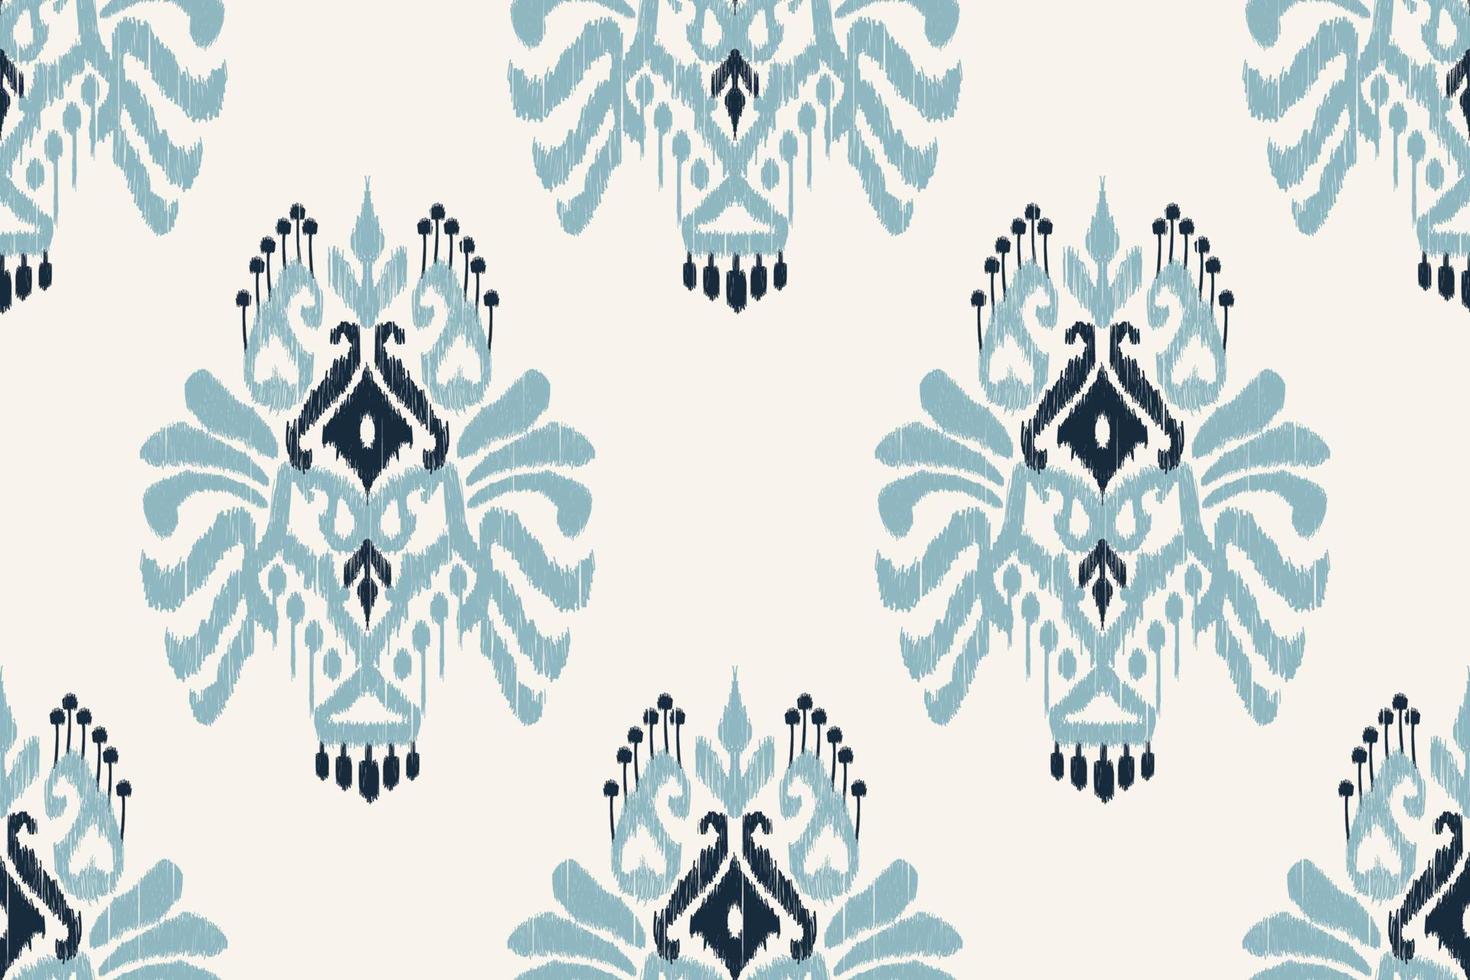 Ikat floral paisley embroidery.blue and white background.geometric ethnic oriental seamless pattern traditional.Aztec style abstract vector illustration.design for texture,fabric,clothing,wrapping.